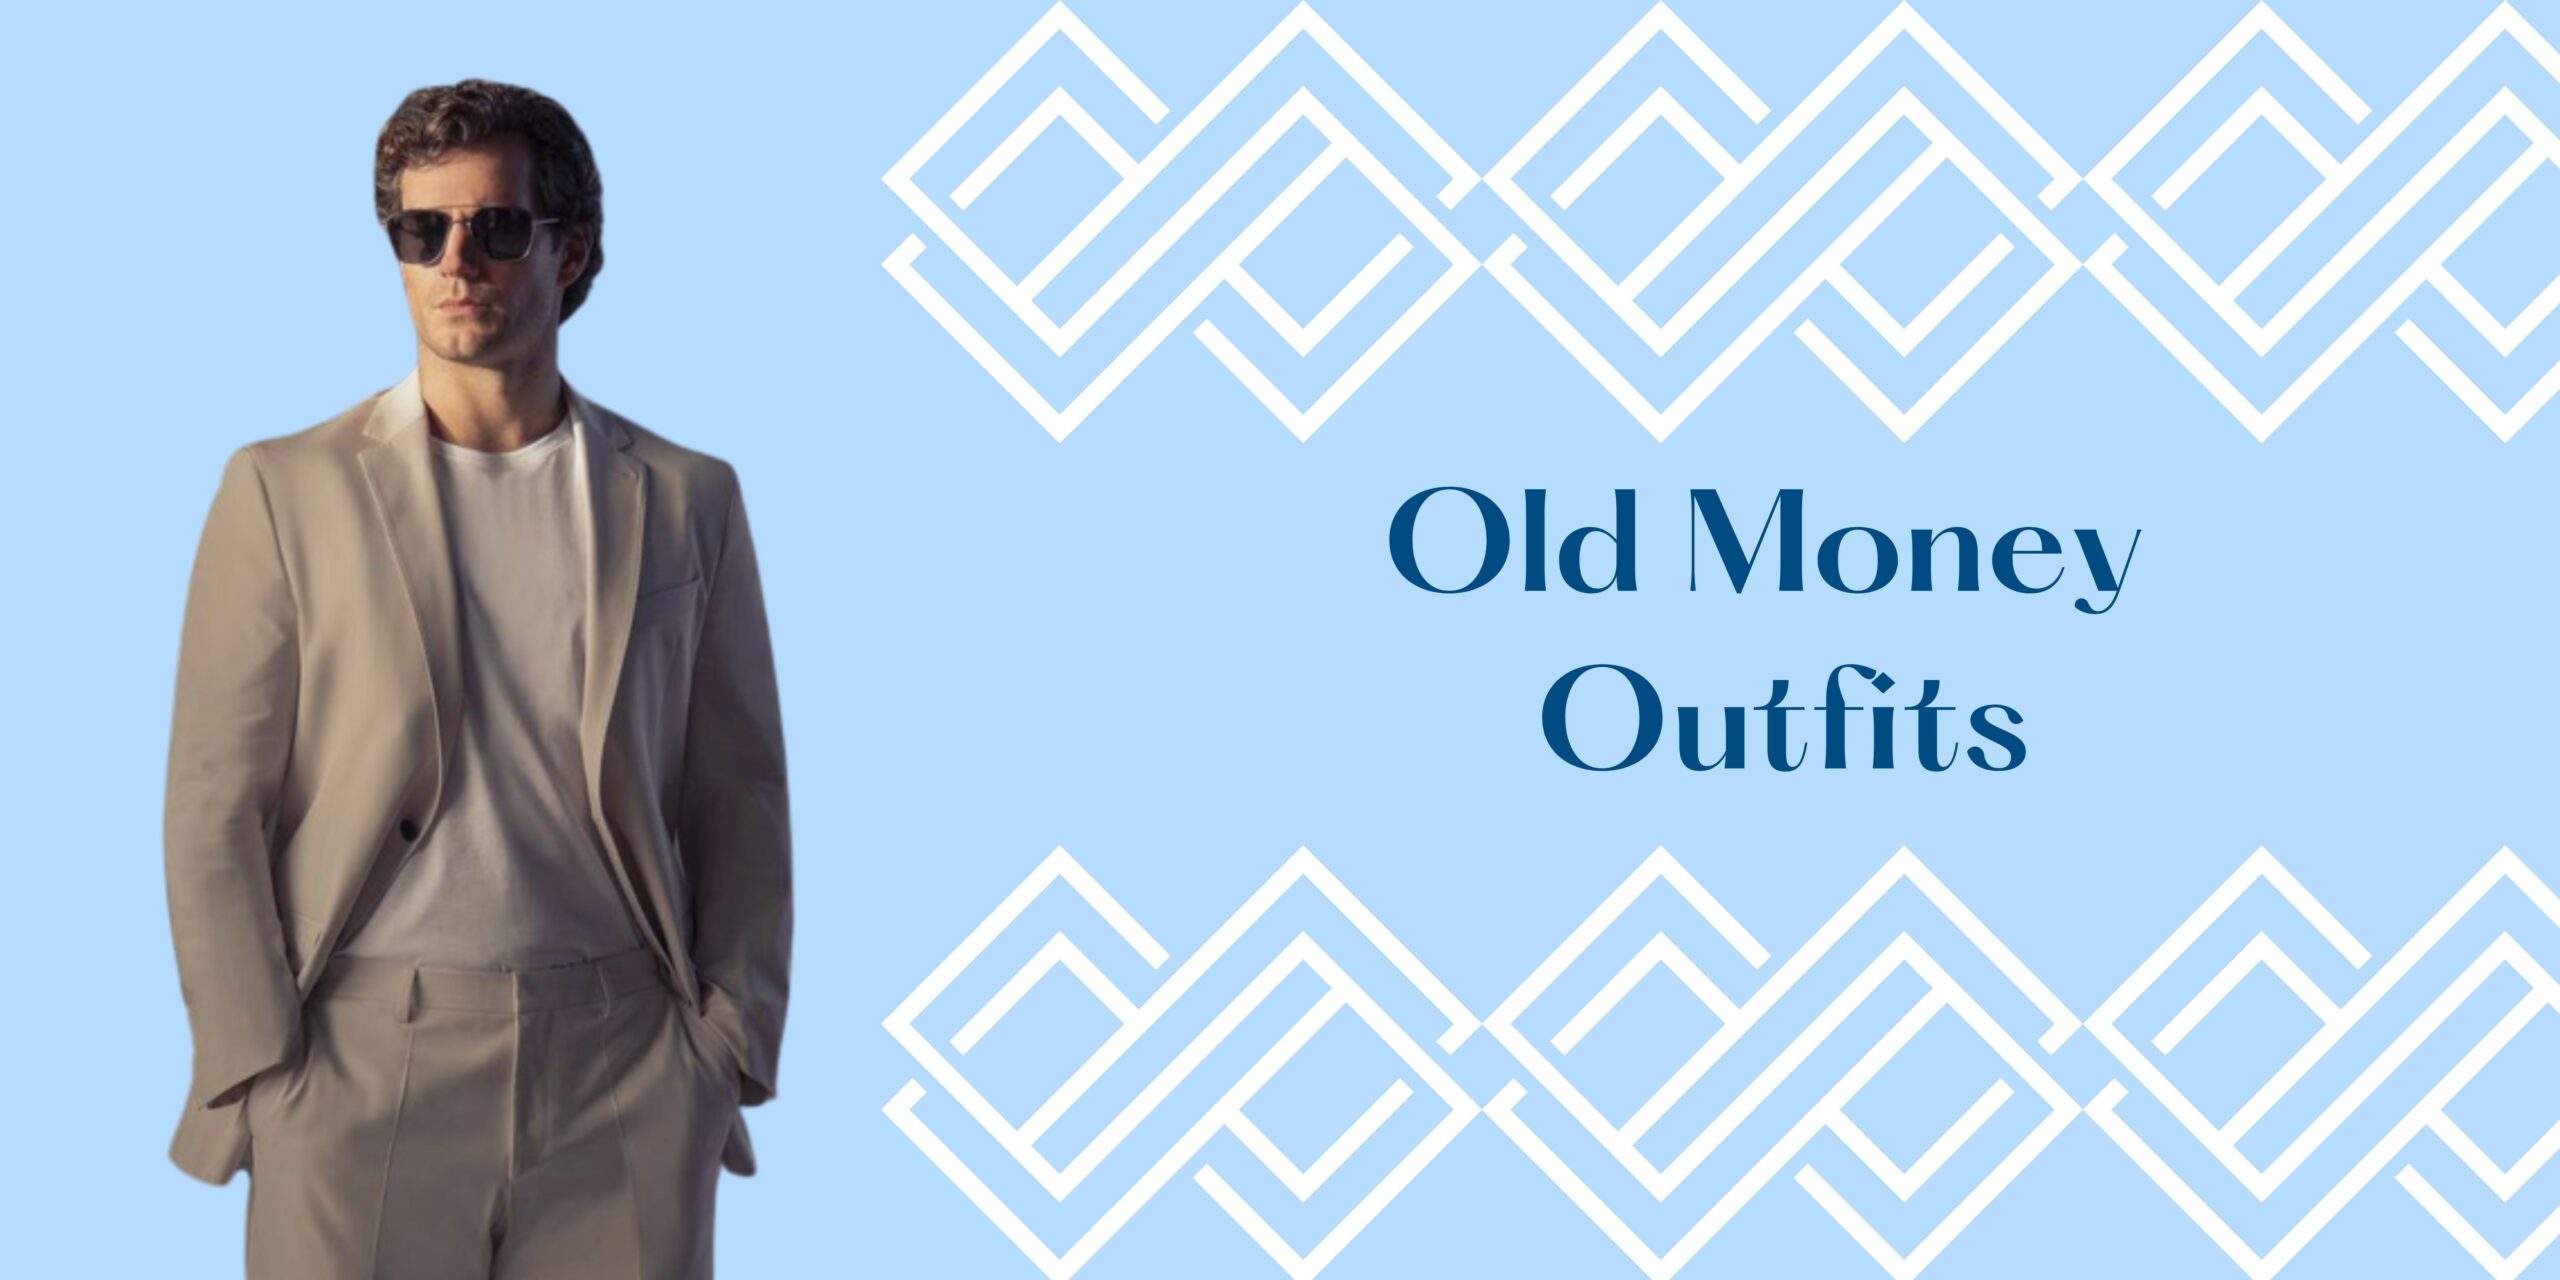 Old Money Style for Men: 6 Outfit Ideas for this Summer Season